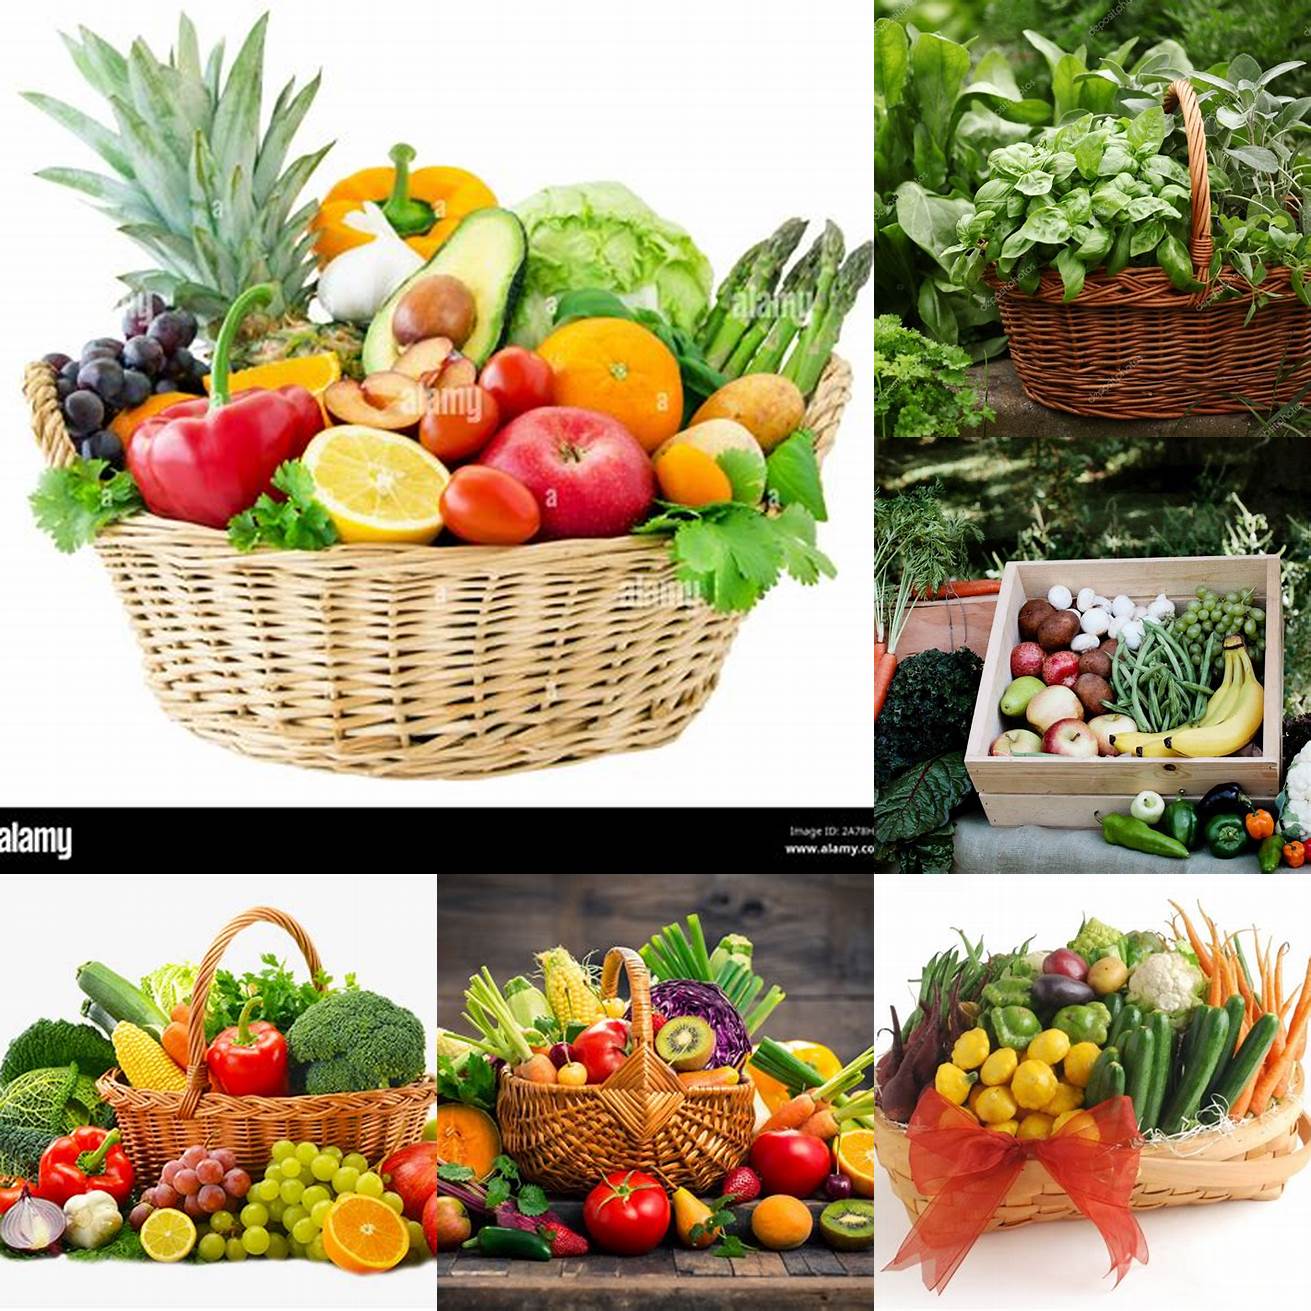 Baskets of fresh produce and herbs